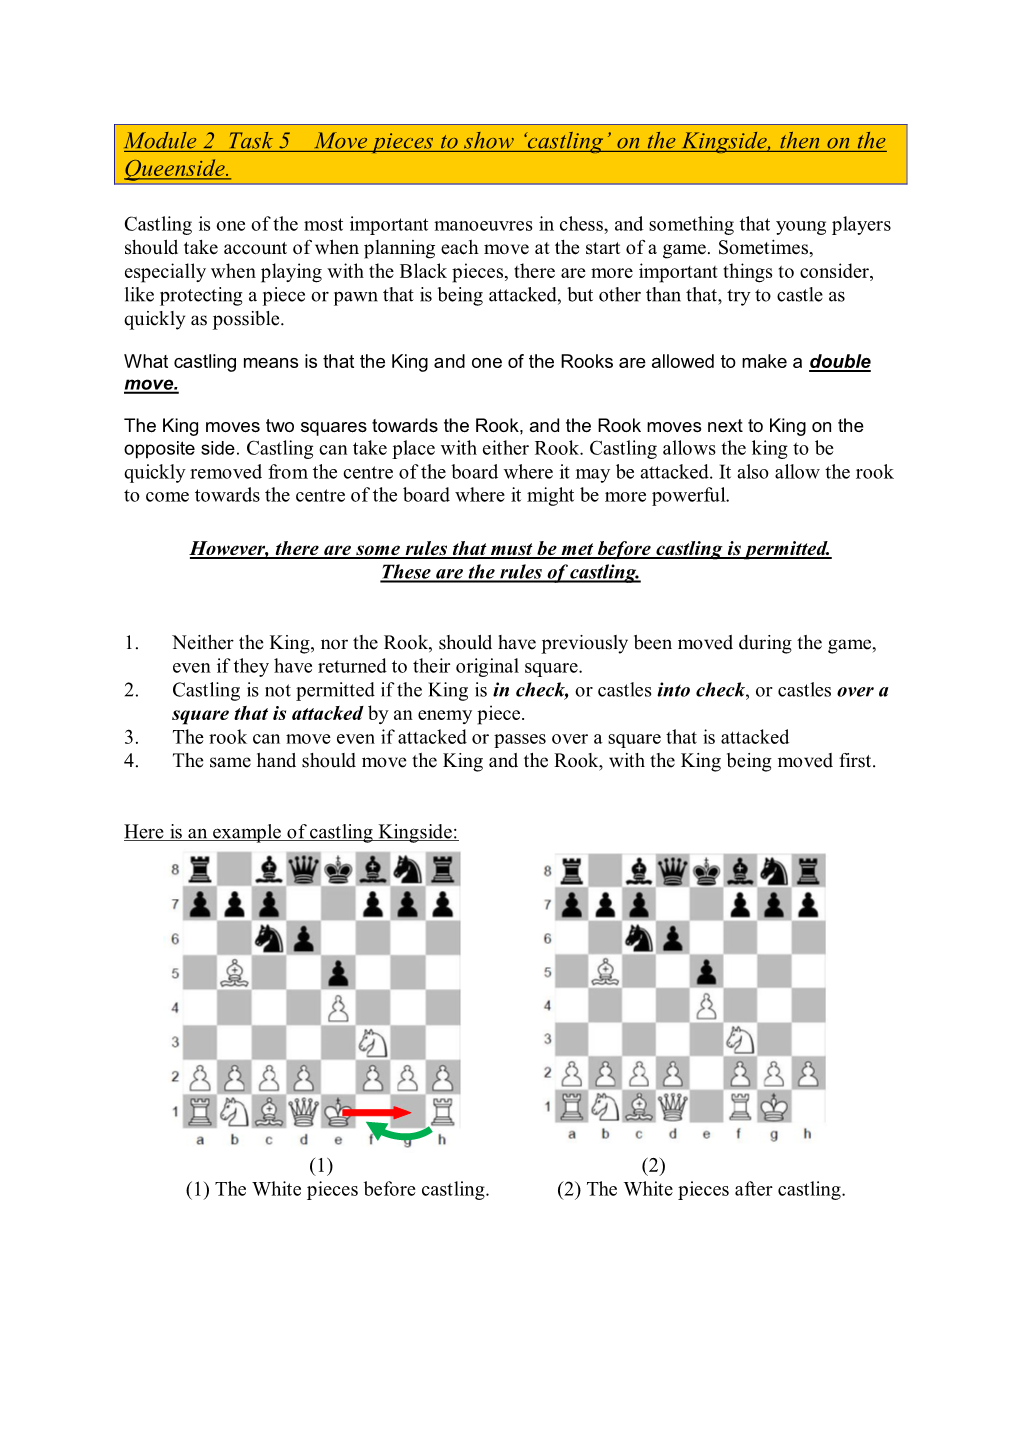 Castling’ on the Kingside, Then on the Queenside